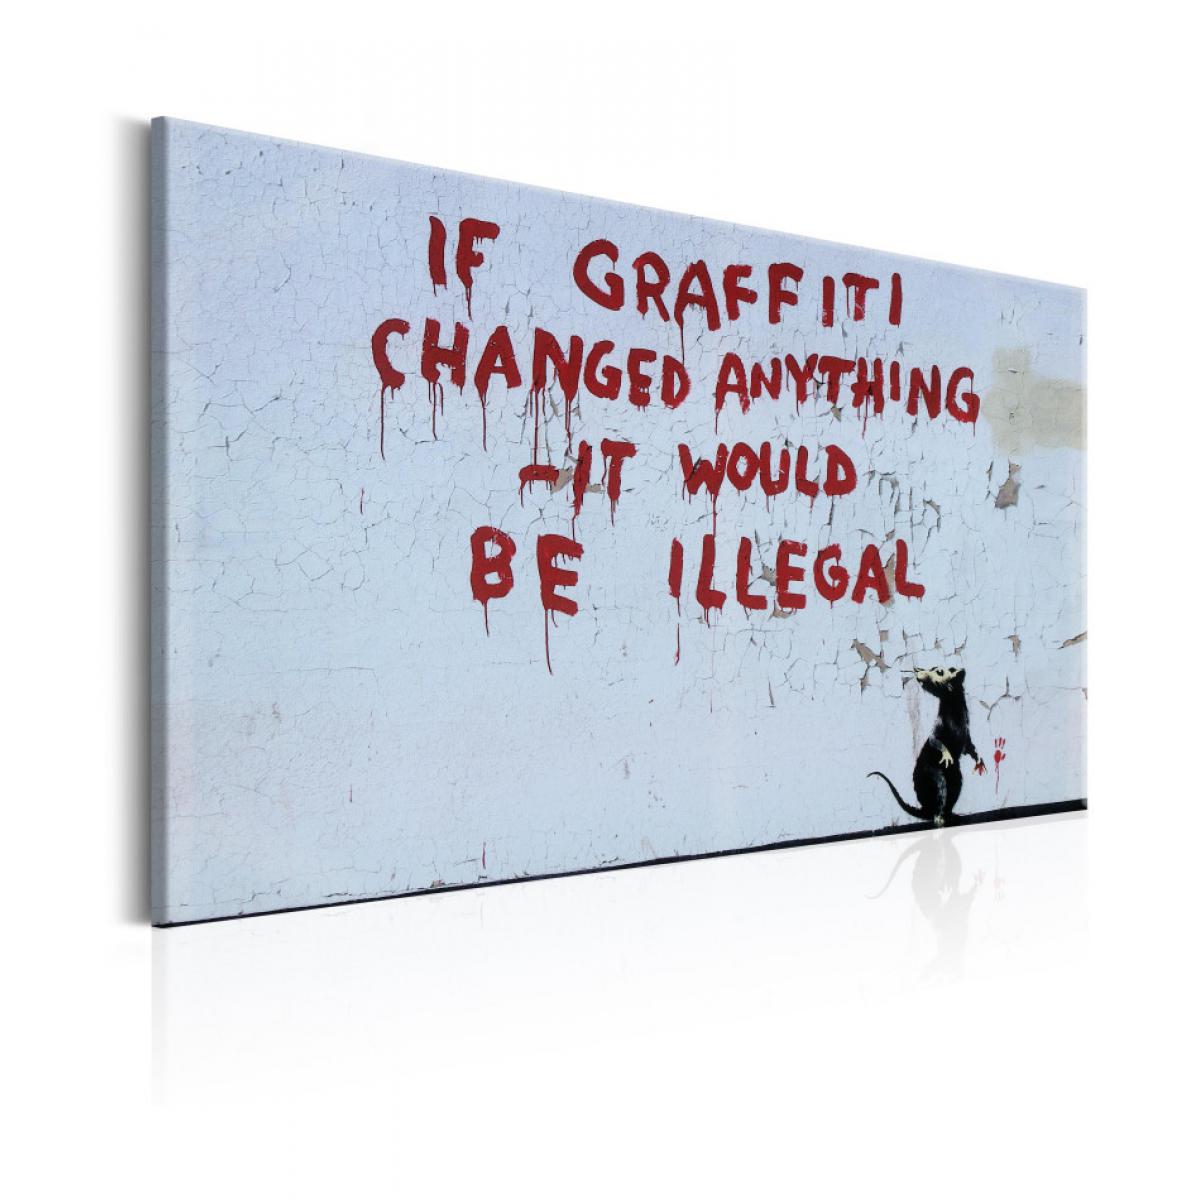 Artgeist - Tableau - If Graffiti Changed Anything by Banksy 60x40 - Tableaux, peintures